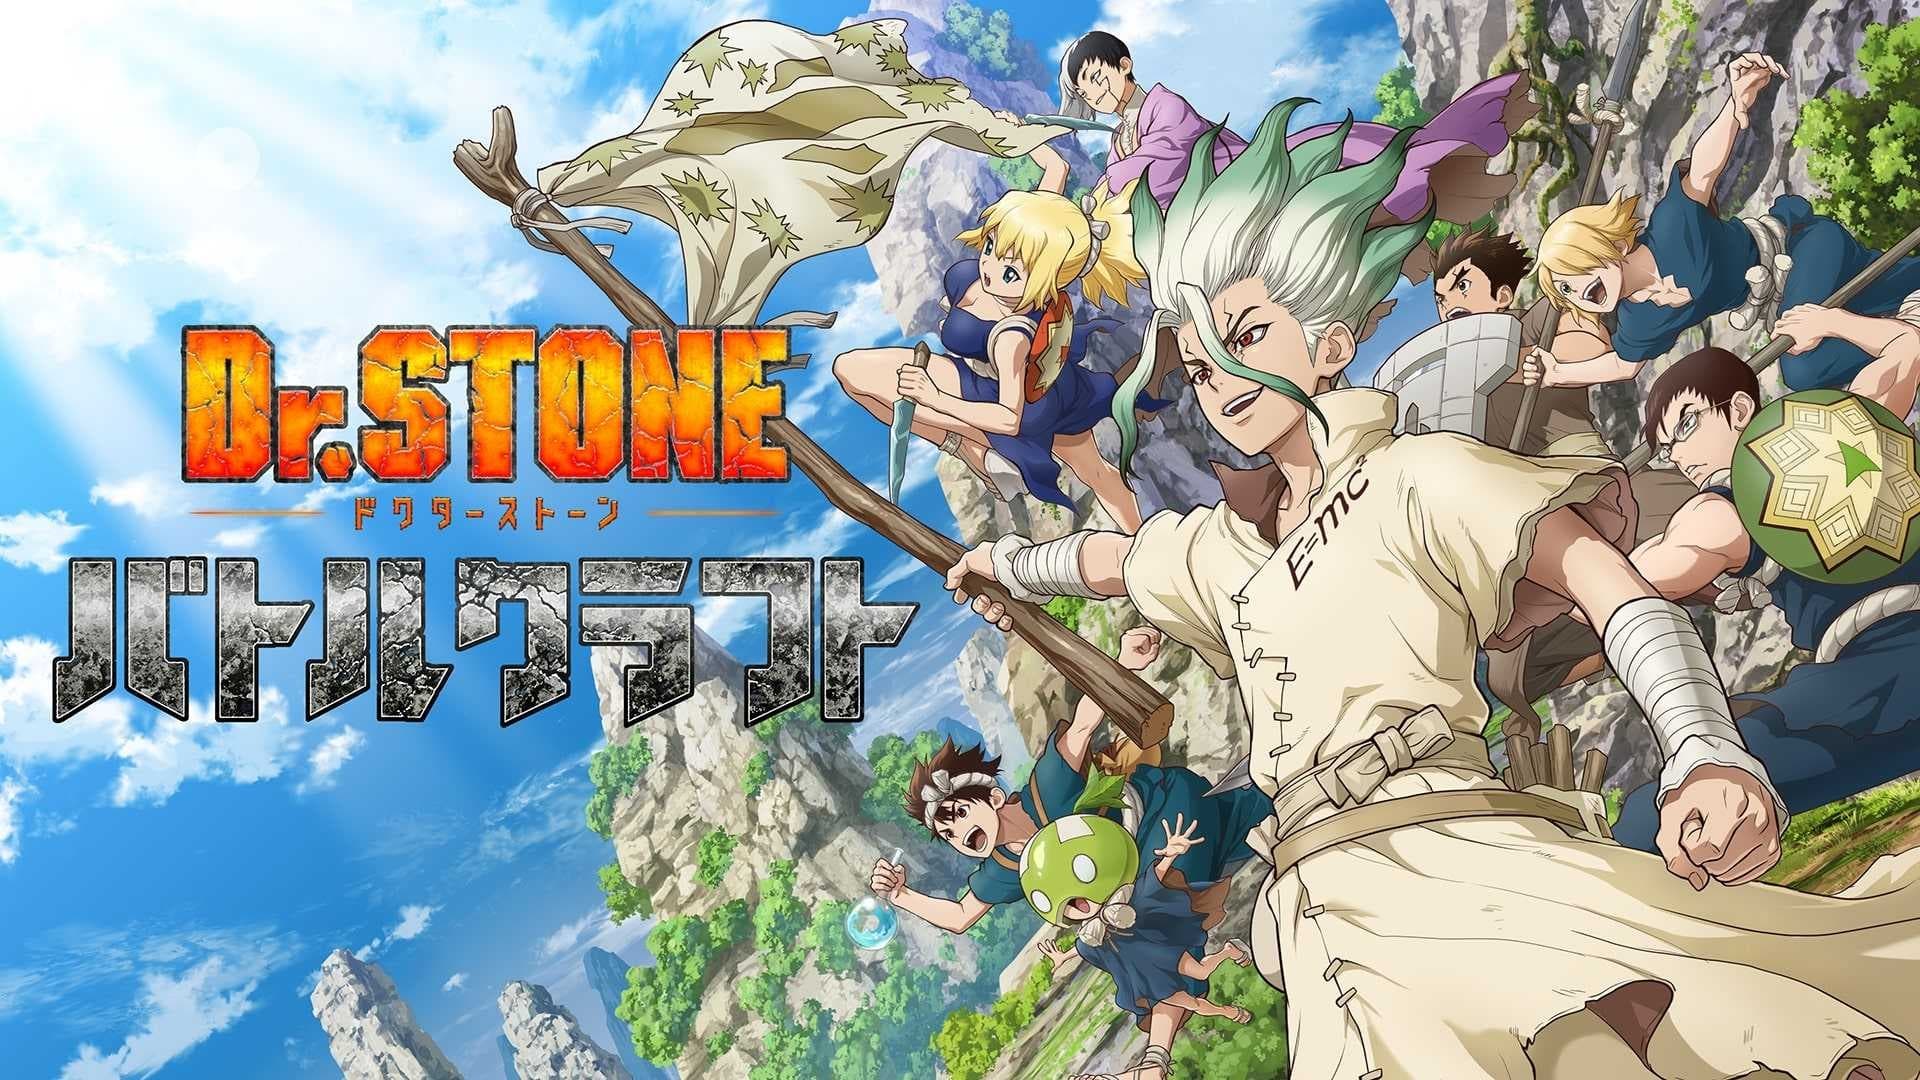 New Dr. Stone Trailer Drops: Senku Faces His Biggest Challenge Yet in Fall 2023 Showdown